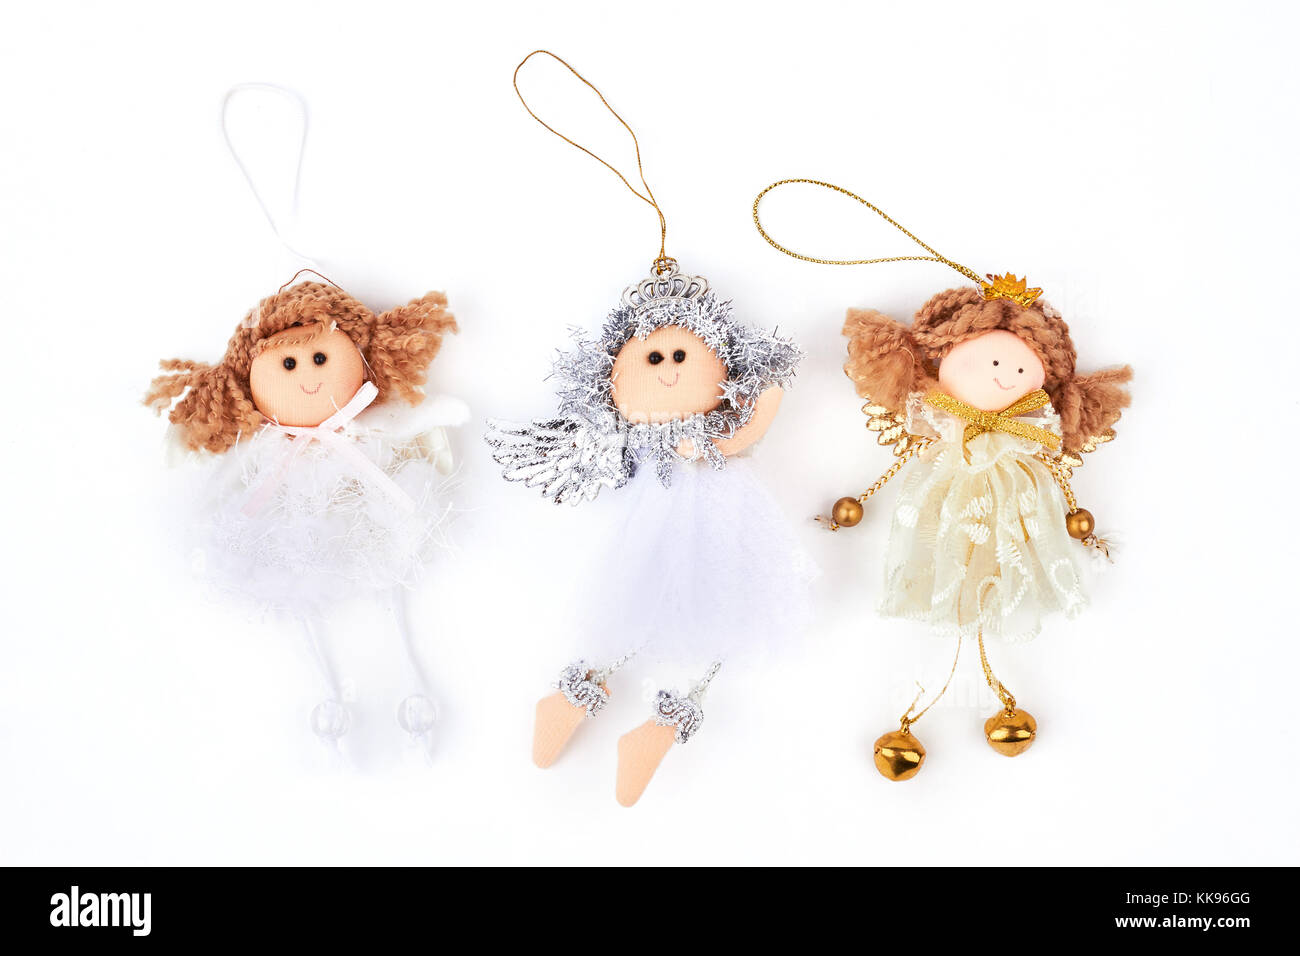 Collection of Christmas angels figurines. Stock Photo